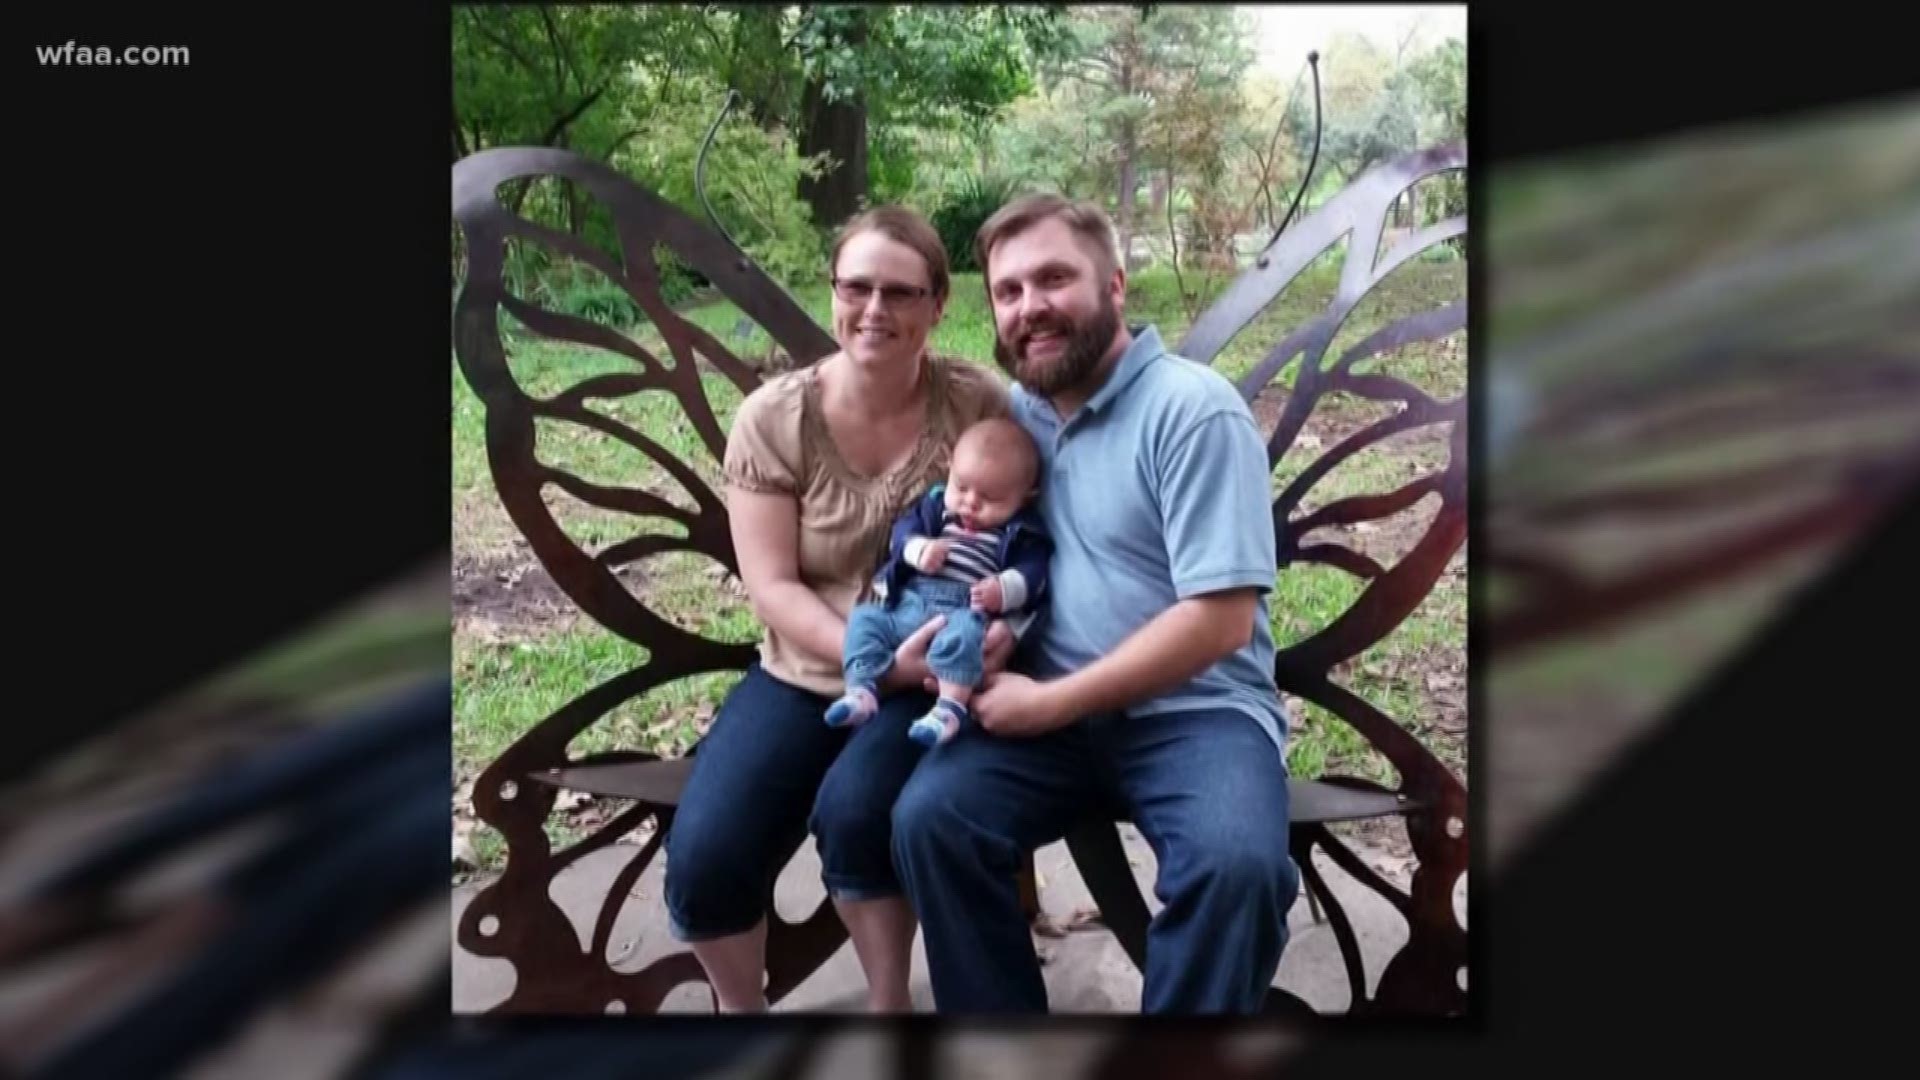 Shanna Vandewege, 36, and her infant son were murdered in 2016. Police say her husband Craig did it. But the trial still has no date.